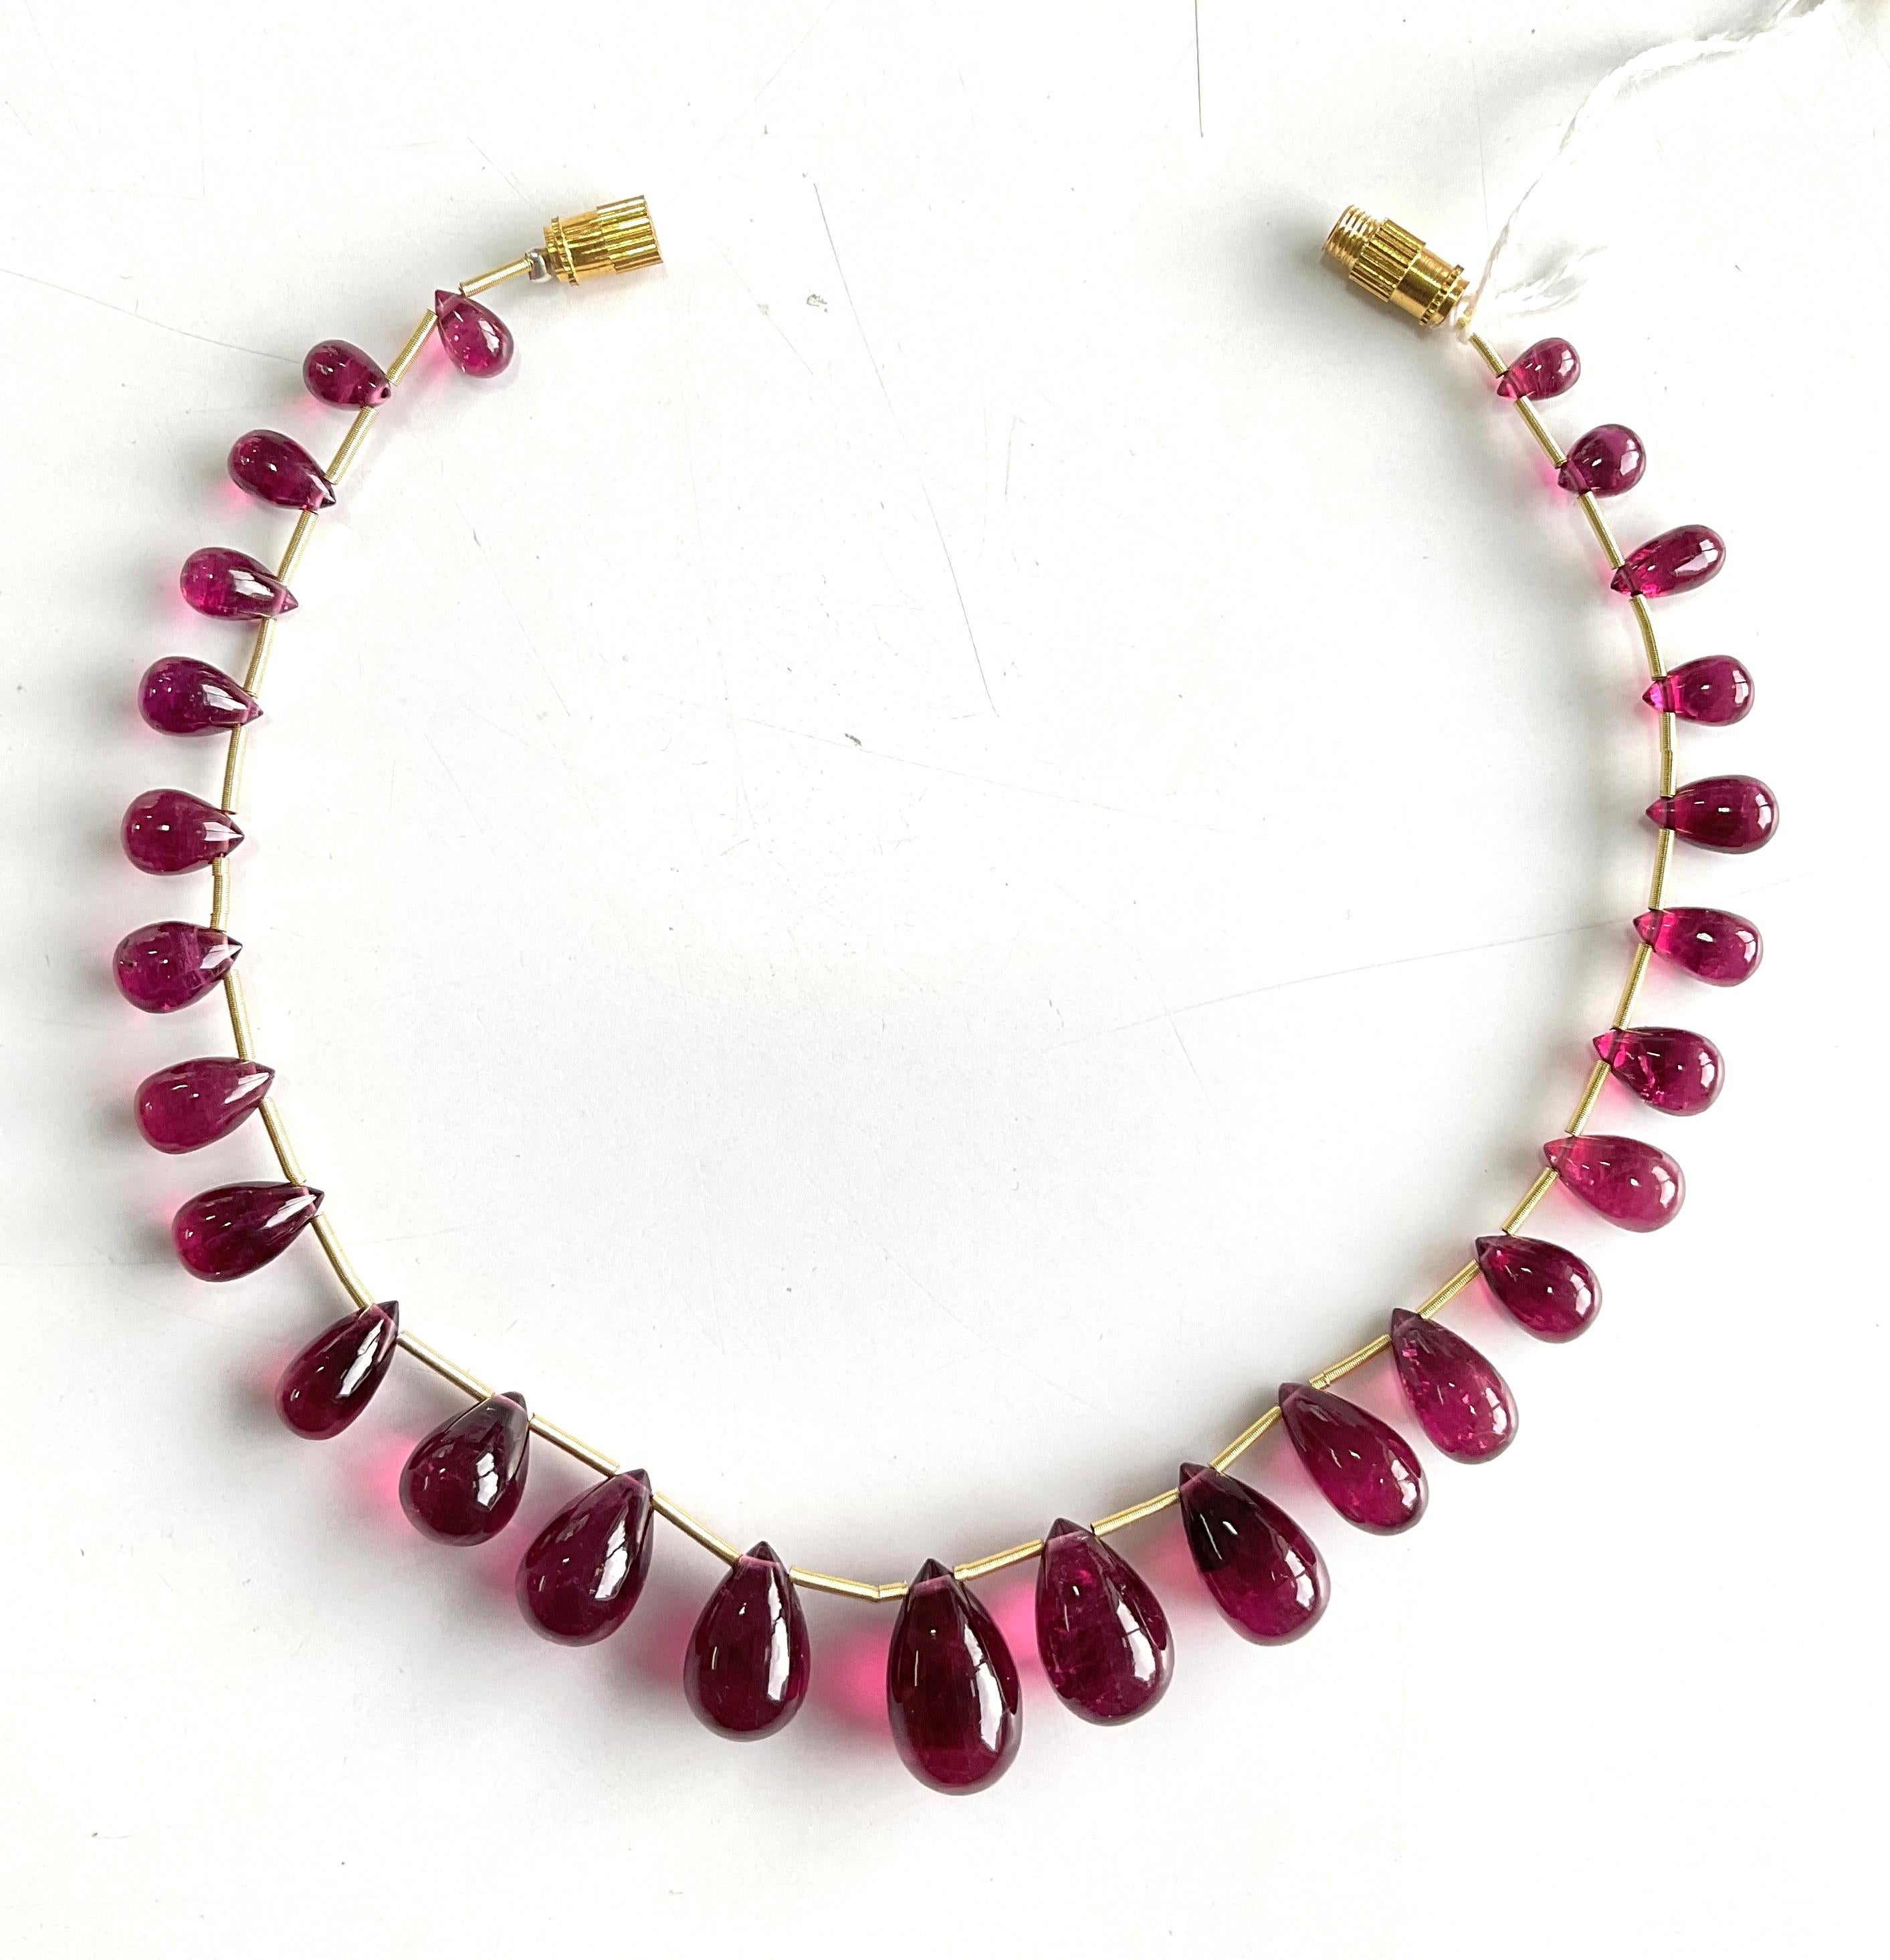 80.00 Carats Rubellite Layout Drops Top Quality For Fine Jewelry Natural Gem

Gemstone - Rubellite Tourmaline
Weight - 80.00 Ct
Size - 4x6 To 9x15 MM
Pieces - 27

